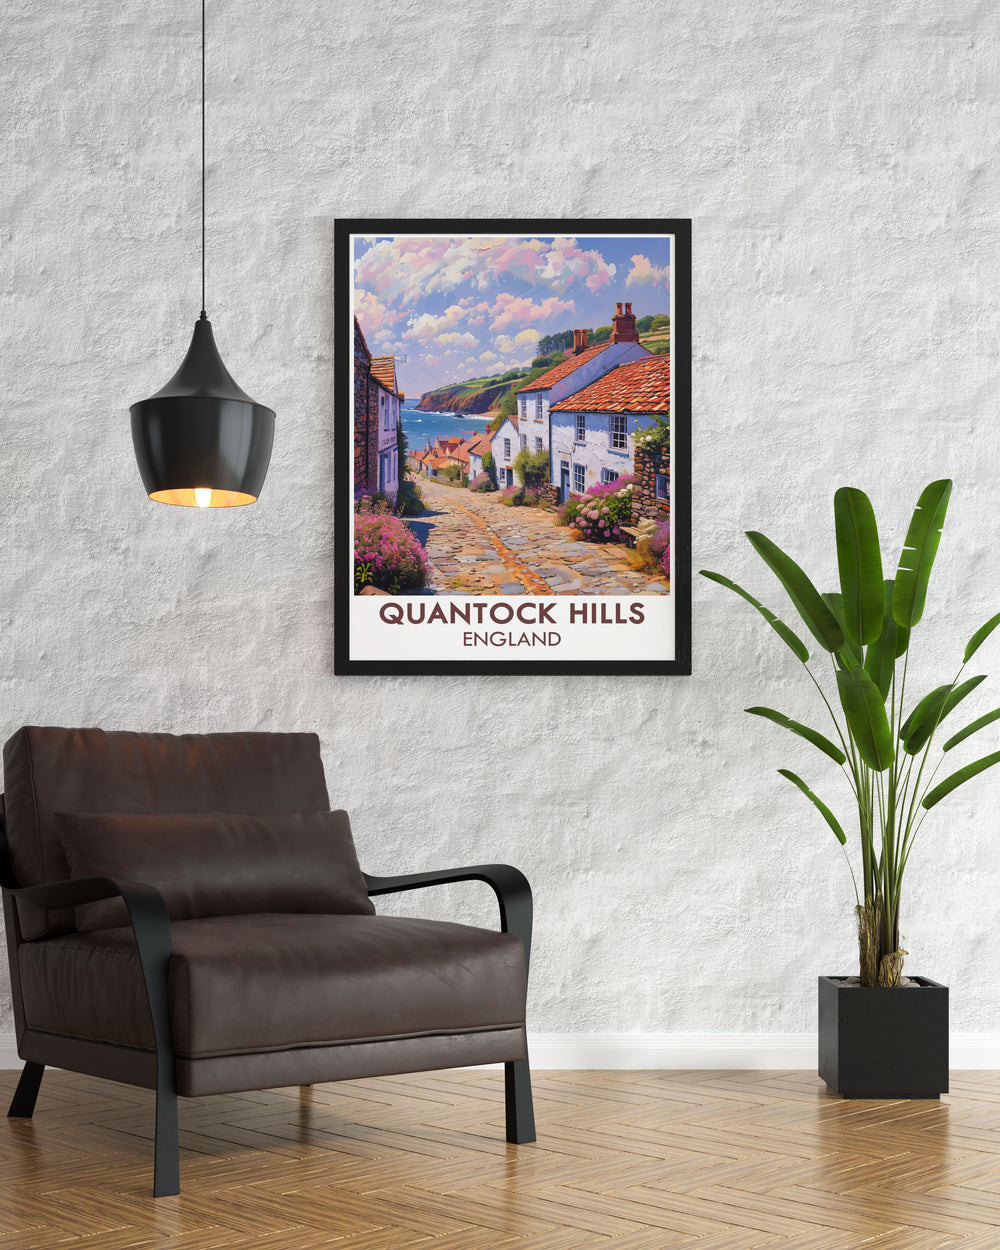 Nether Stowey vintage travel poster featuring the tranquil landscapes of Quantock Hills and Somerset AONB ideal for adding a touch of rustic charm to any living space and capturing the essence of the Bristol Channel and The Quantocks.